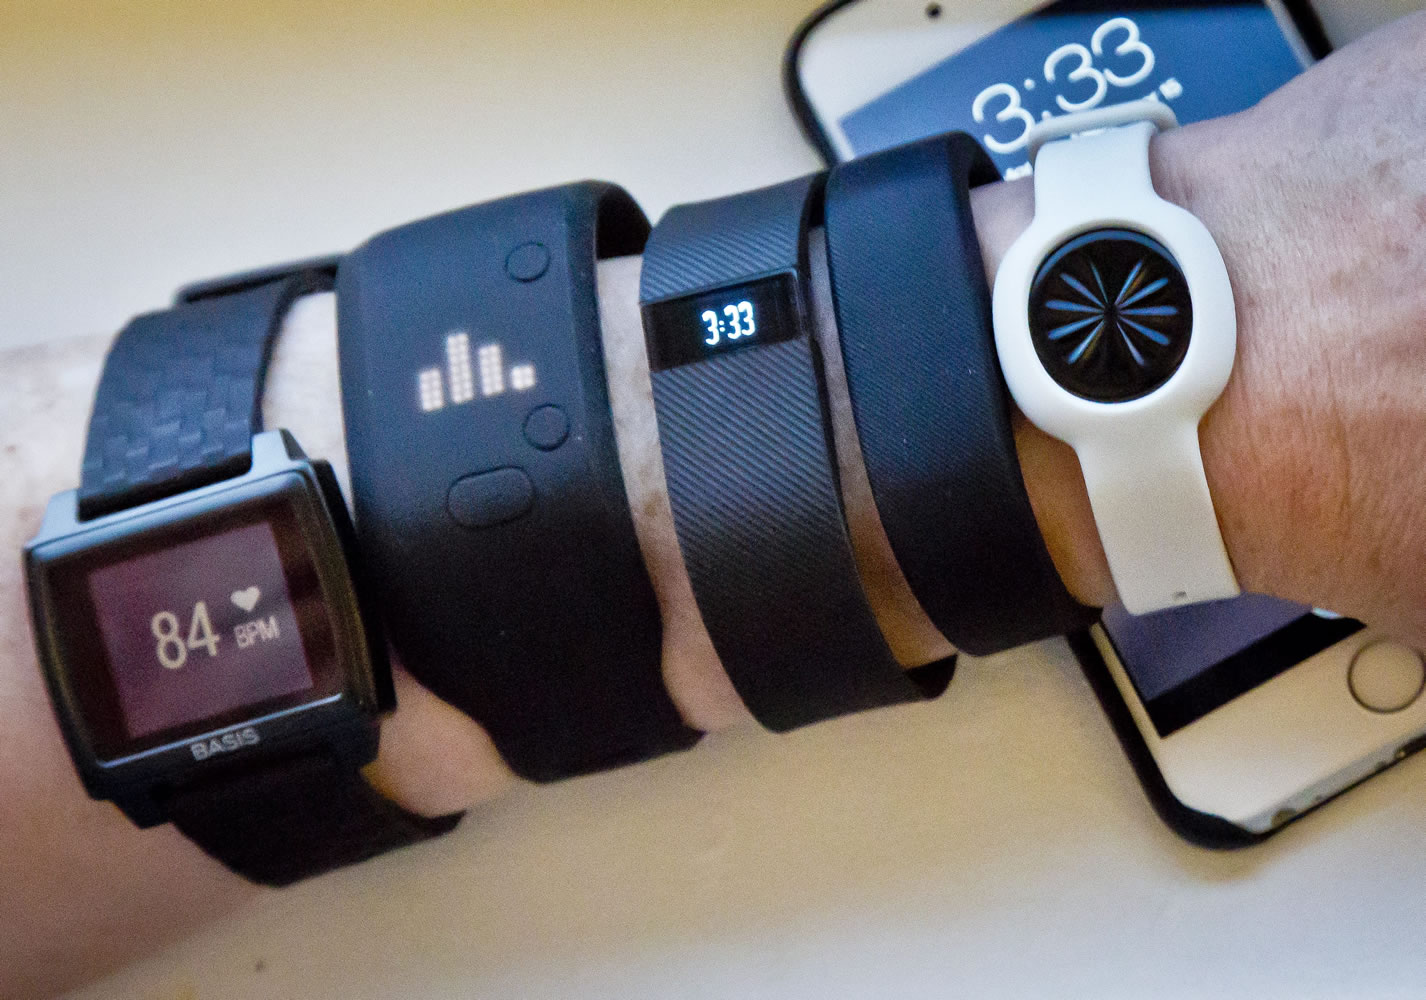 Fitness trackers, from left, Basis Peak, Adidas Fit Smart, Fitbit Charge, Sony SmartBand, and Jawbone Move, are displayed, with an iPhone in the background.